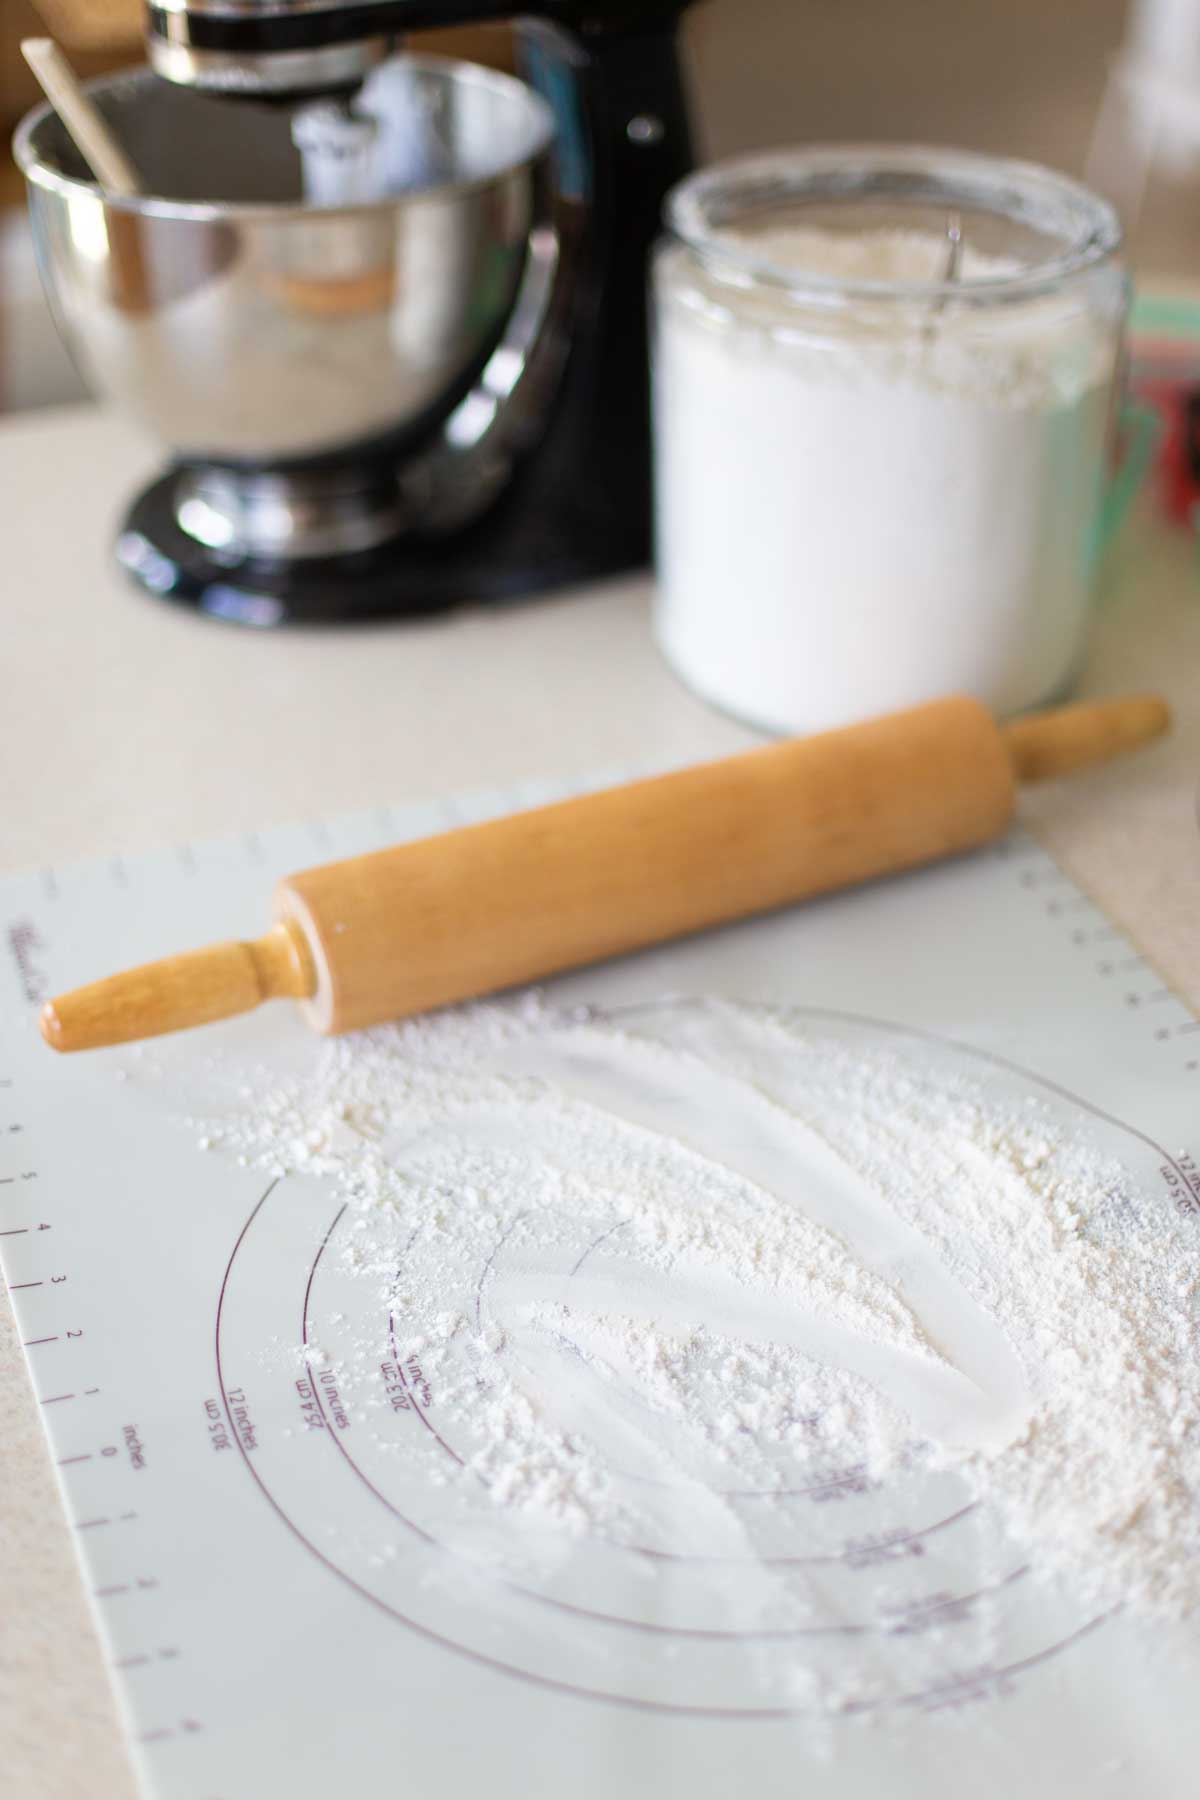 A baking mat sprinkled with flour has a rolling pin and stand mixer in the background.